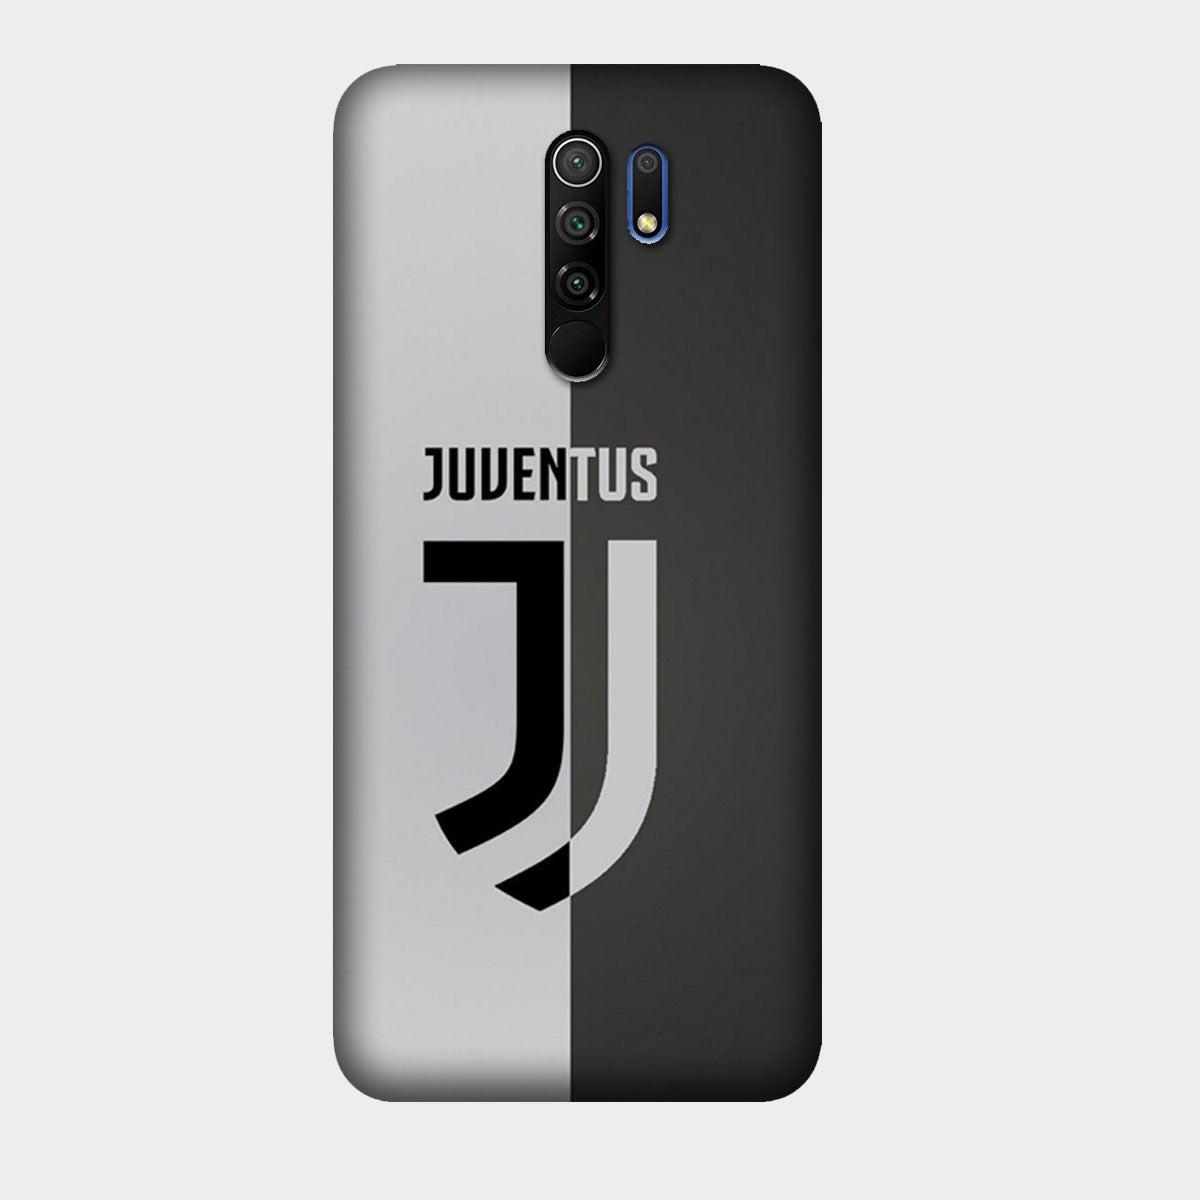 Juventus FC - Mobile Phone Cover - Hard Case